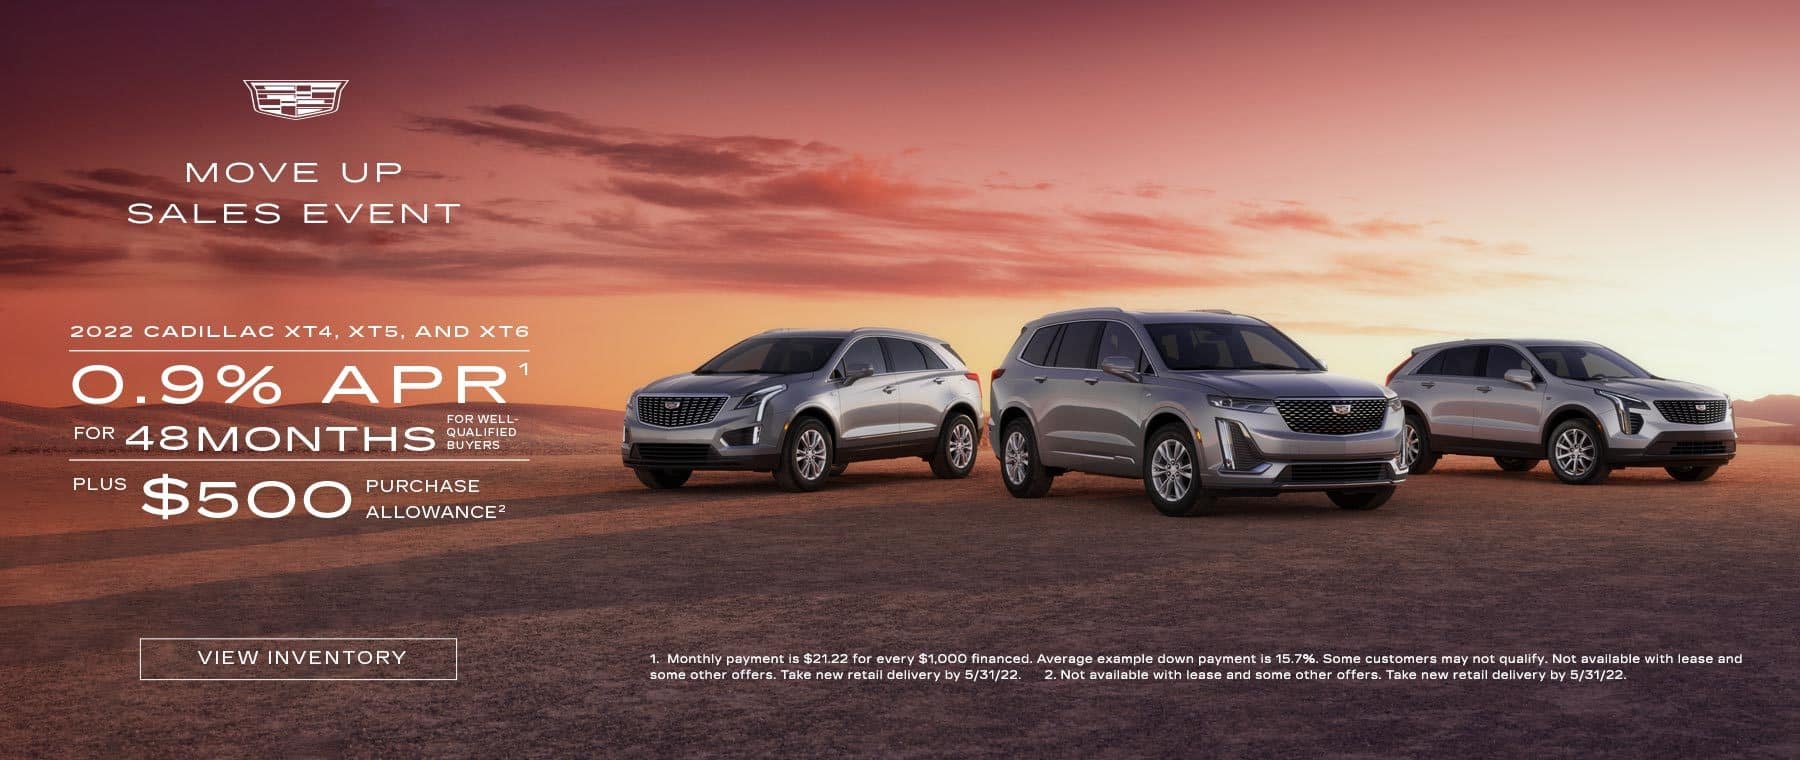 2022 Cadillac XT4, XT5, and XT6. 0.9% APR for 48 months for well-qualified buyers plus $500 purchase allowance.